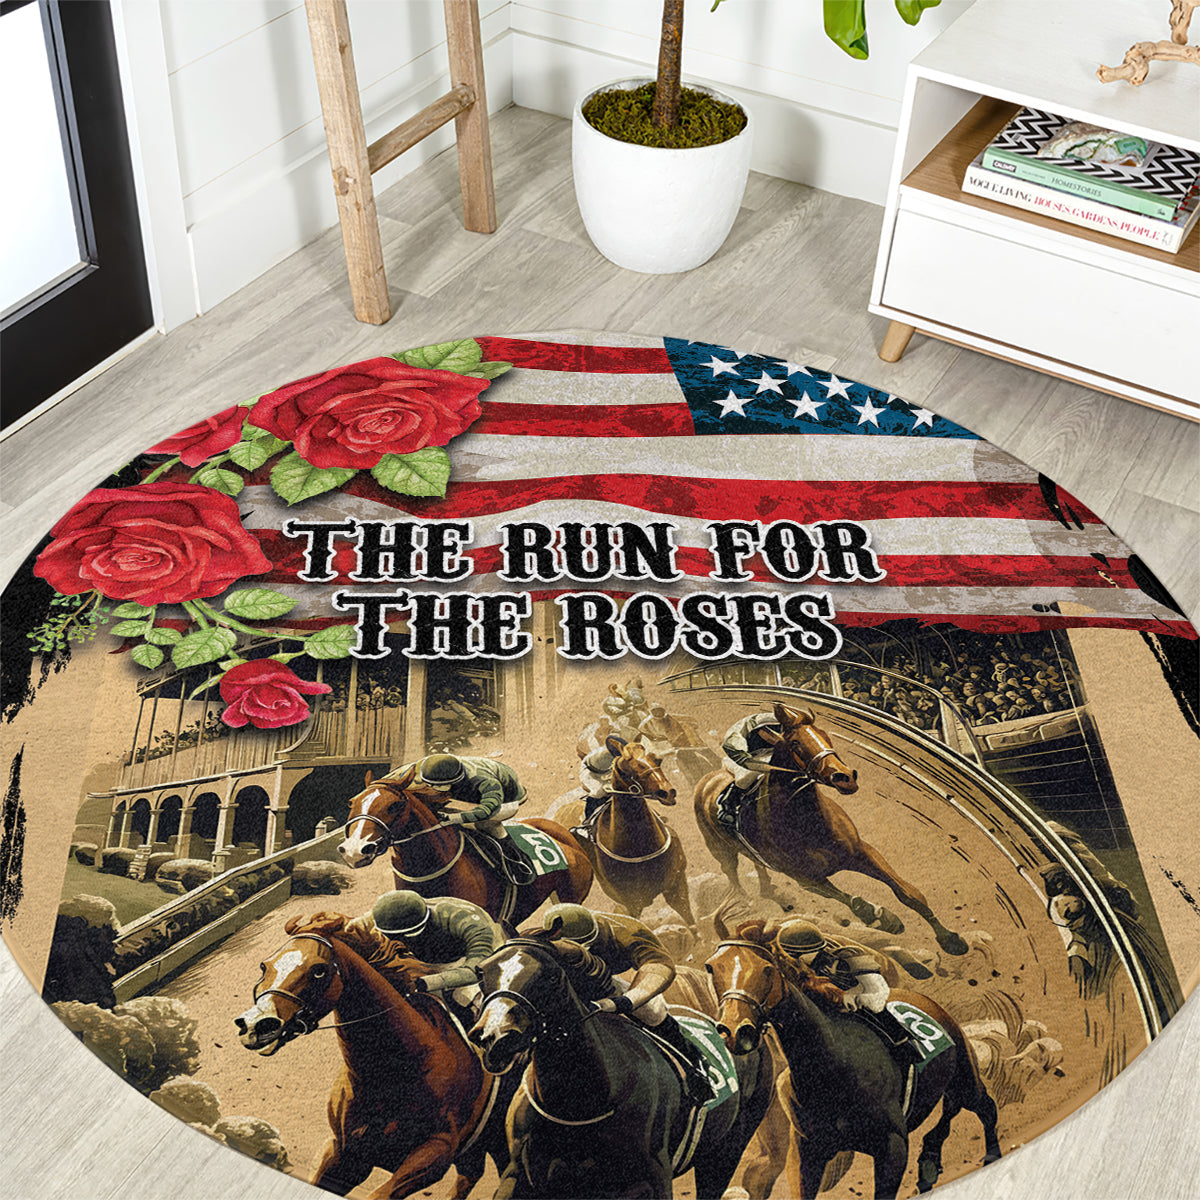 The First Kentucky Horse Racing Round Carpet Since 1875 American Flag Vintage Style